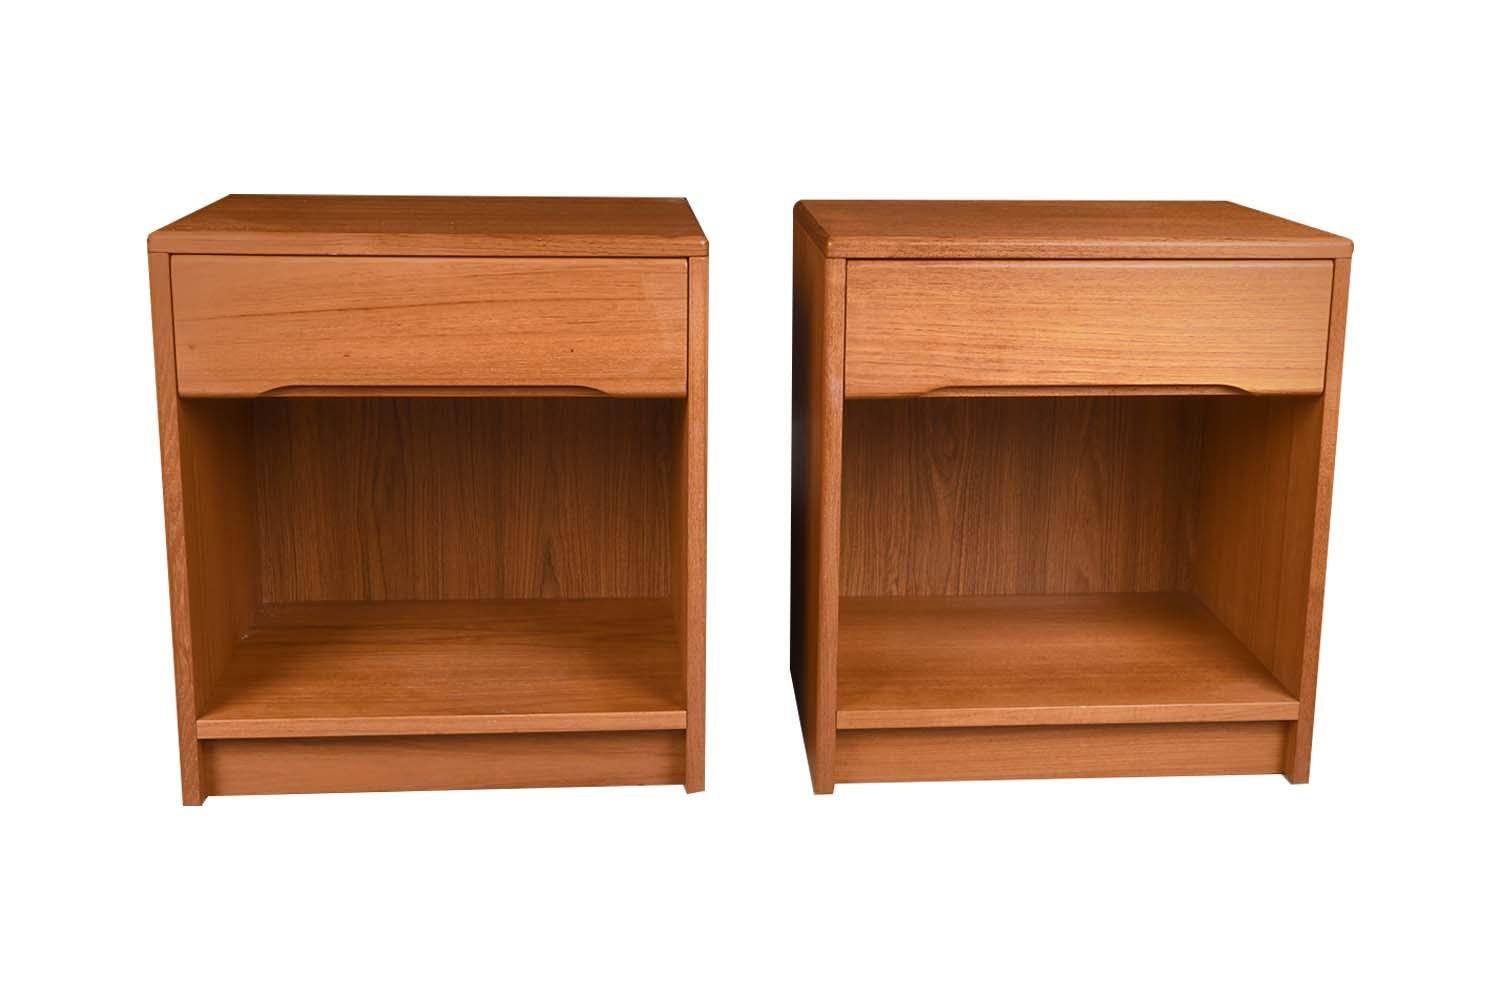 These Scandinavian Modernist, teak Danish tables/ nightstands were produced in Denmark, circa 1970s, elegant design with clean straight lines make them sleek, minimalist pieces with functionality, iconic Scandinavian classic look, gorgeous hues of